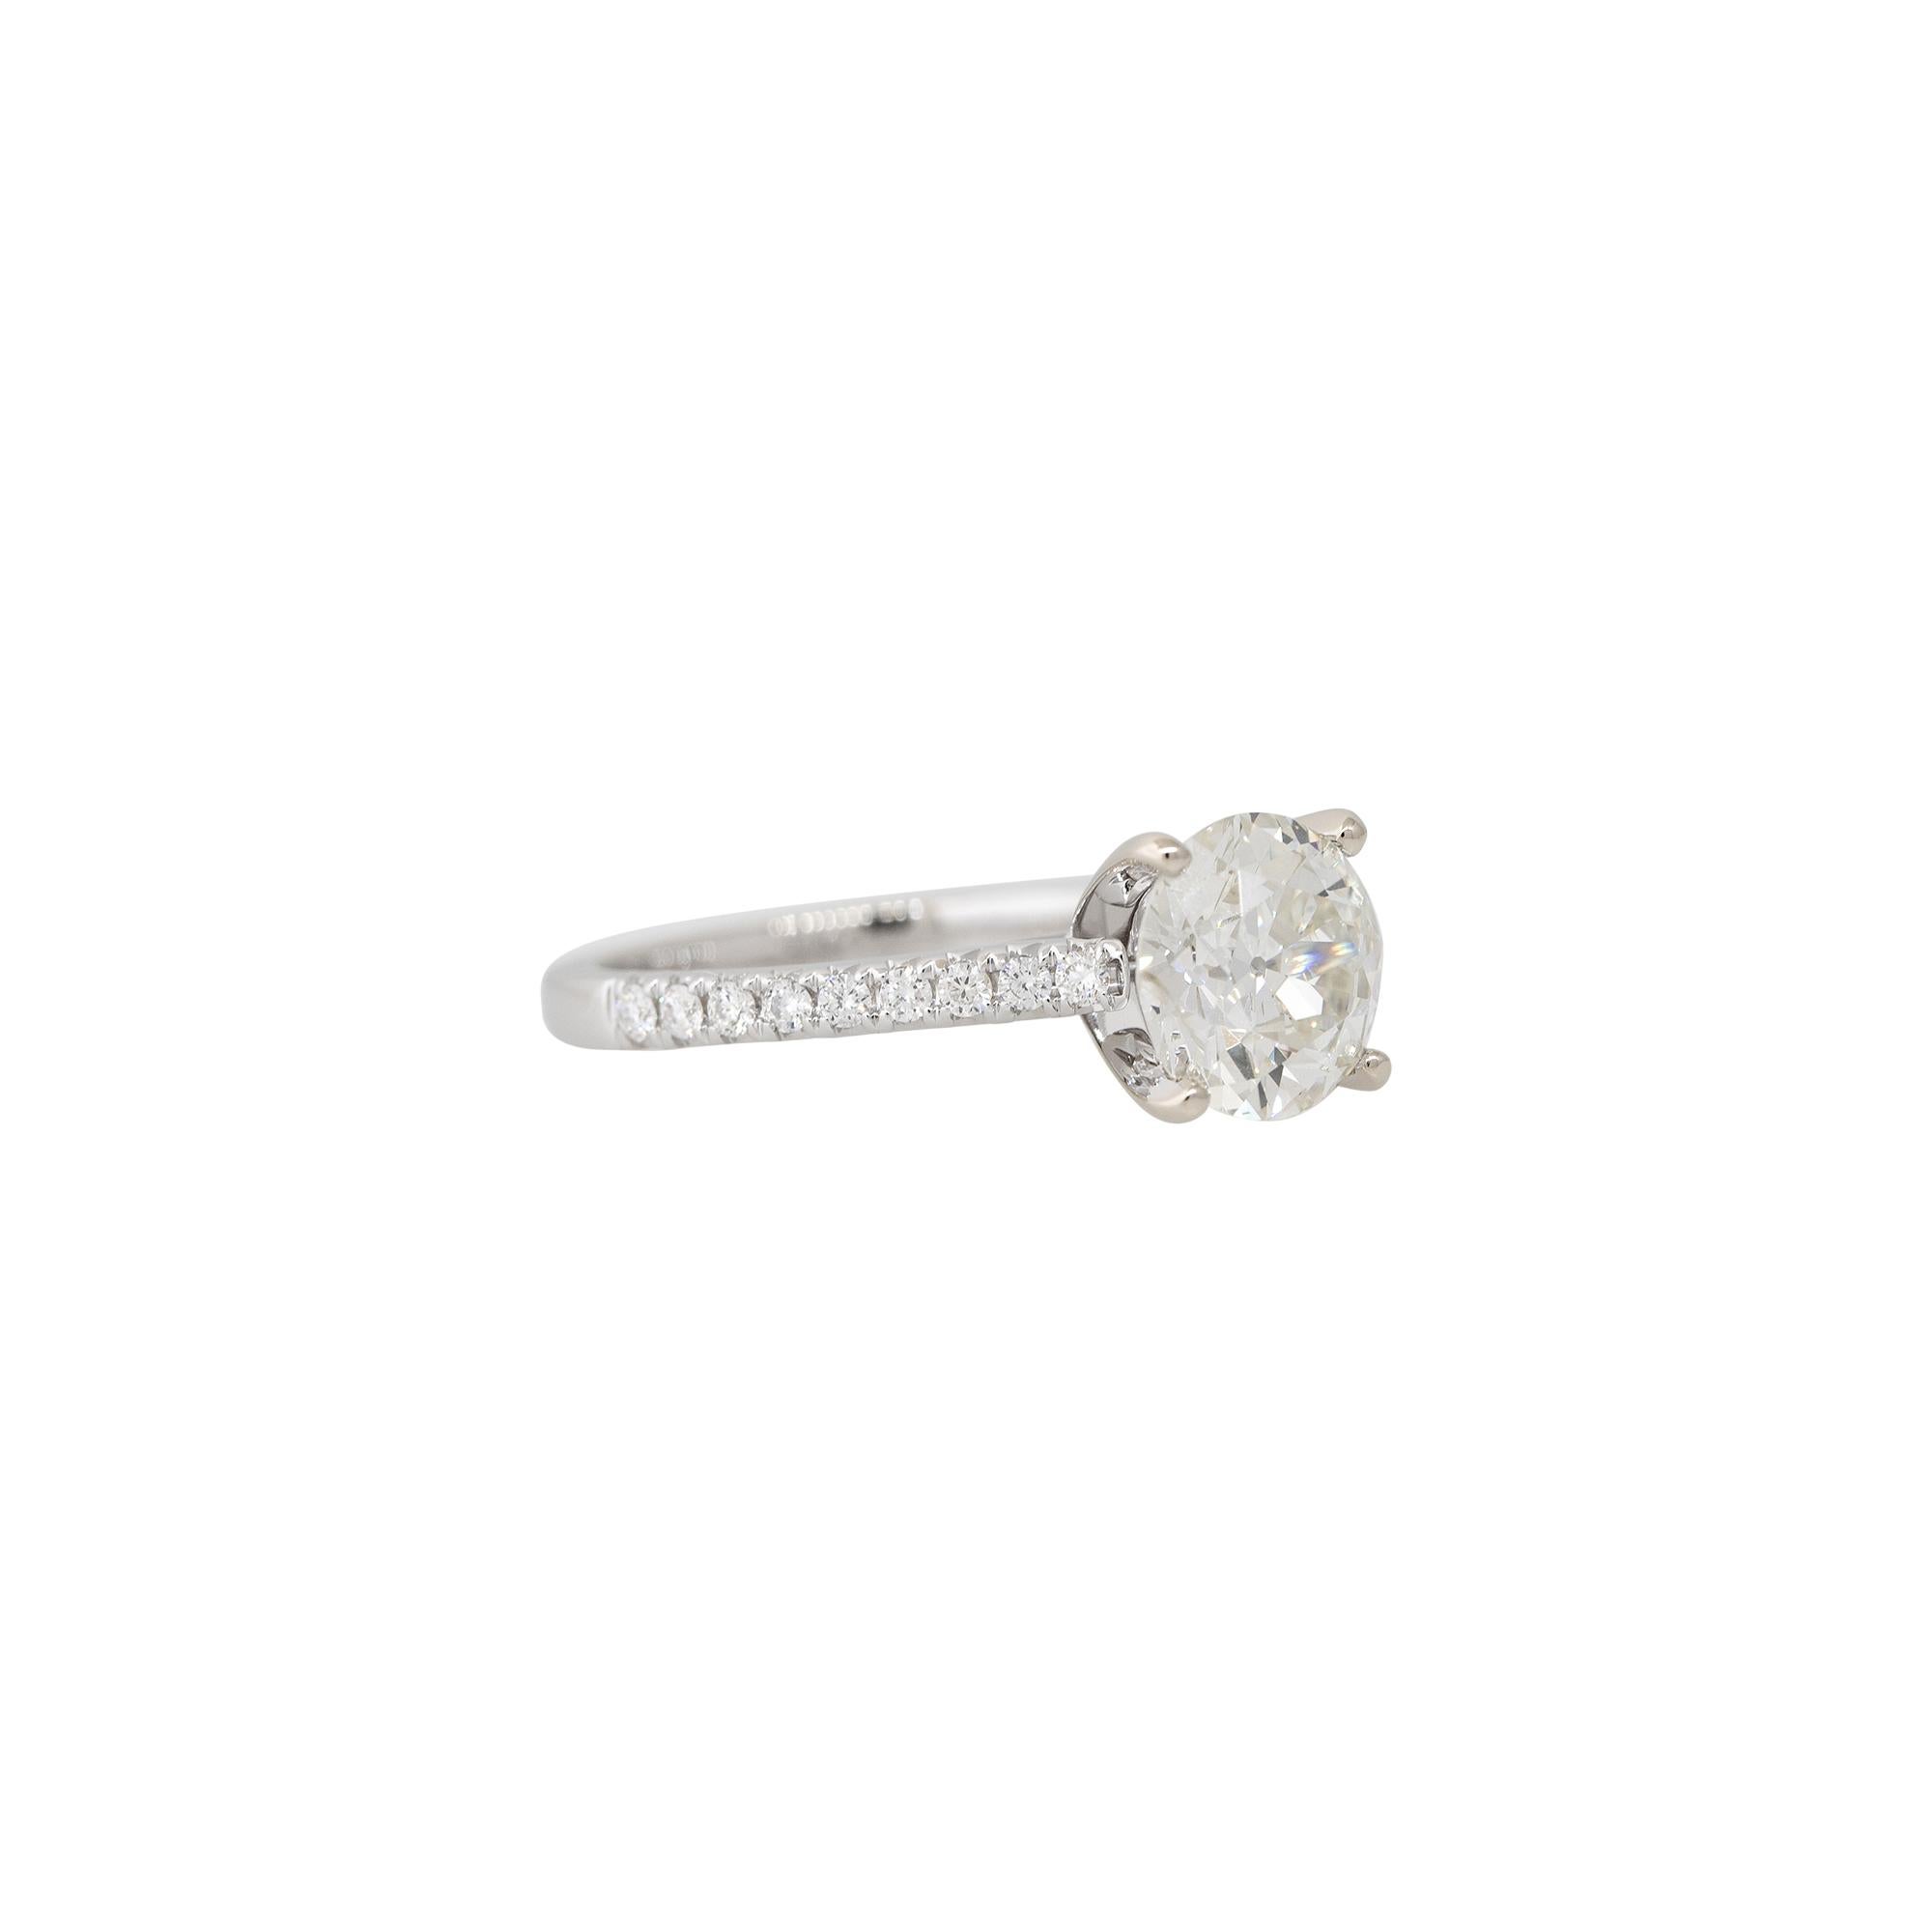 GIA 18k White Gold 2.18ctw Circular Brilliant Cut Diamond Engagement Ring

Center Details: GIA 2.18ct Circular Brilliant Cut Natural Diamond that is L in color and SI2 in clarity
GIA Report # 2223715731
8.35 - 8.46 x 4.65 mm
Polish: